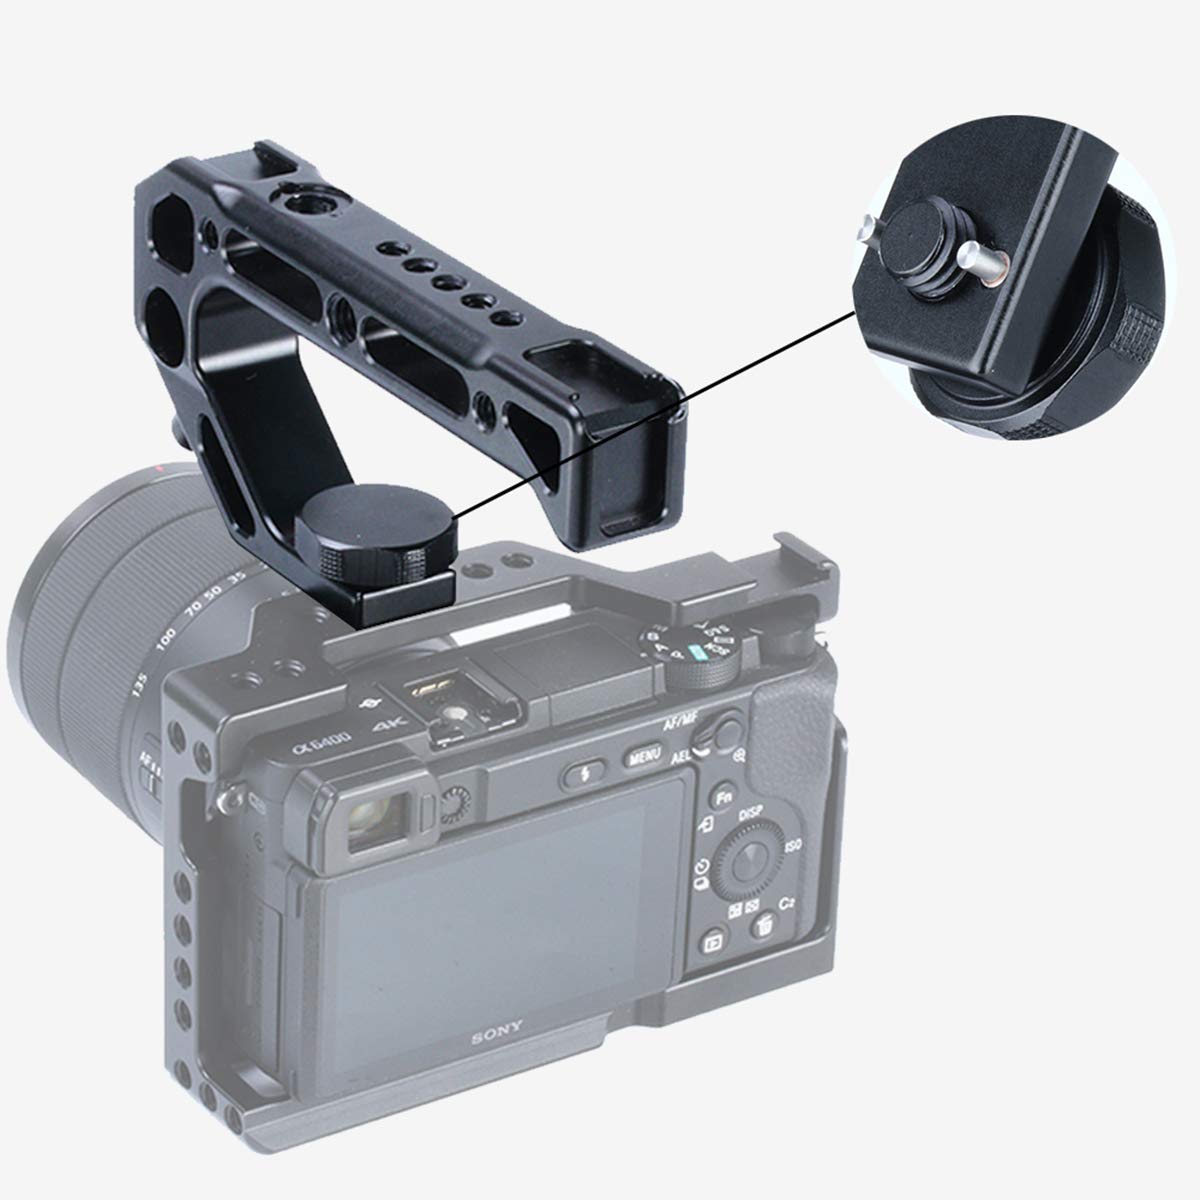 UURig R008 Camera/DSLR Top Handle with Locating Holes for ARRI, Fits for Sony A6400 6300 Camera Cage Low Angle Shots 4 Cold Shoe Mount Microphone 15MM NATO Rail Rod Clamp Tube Hole